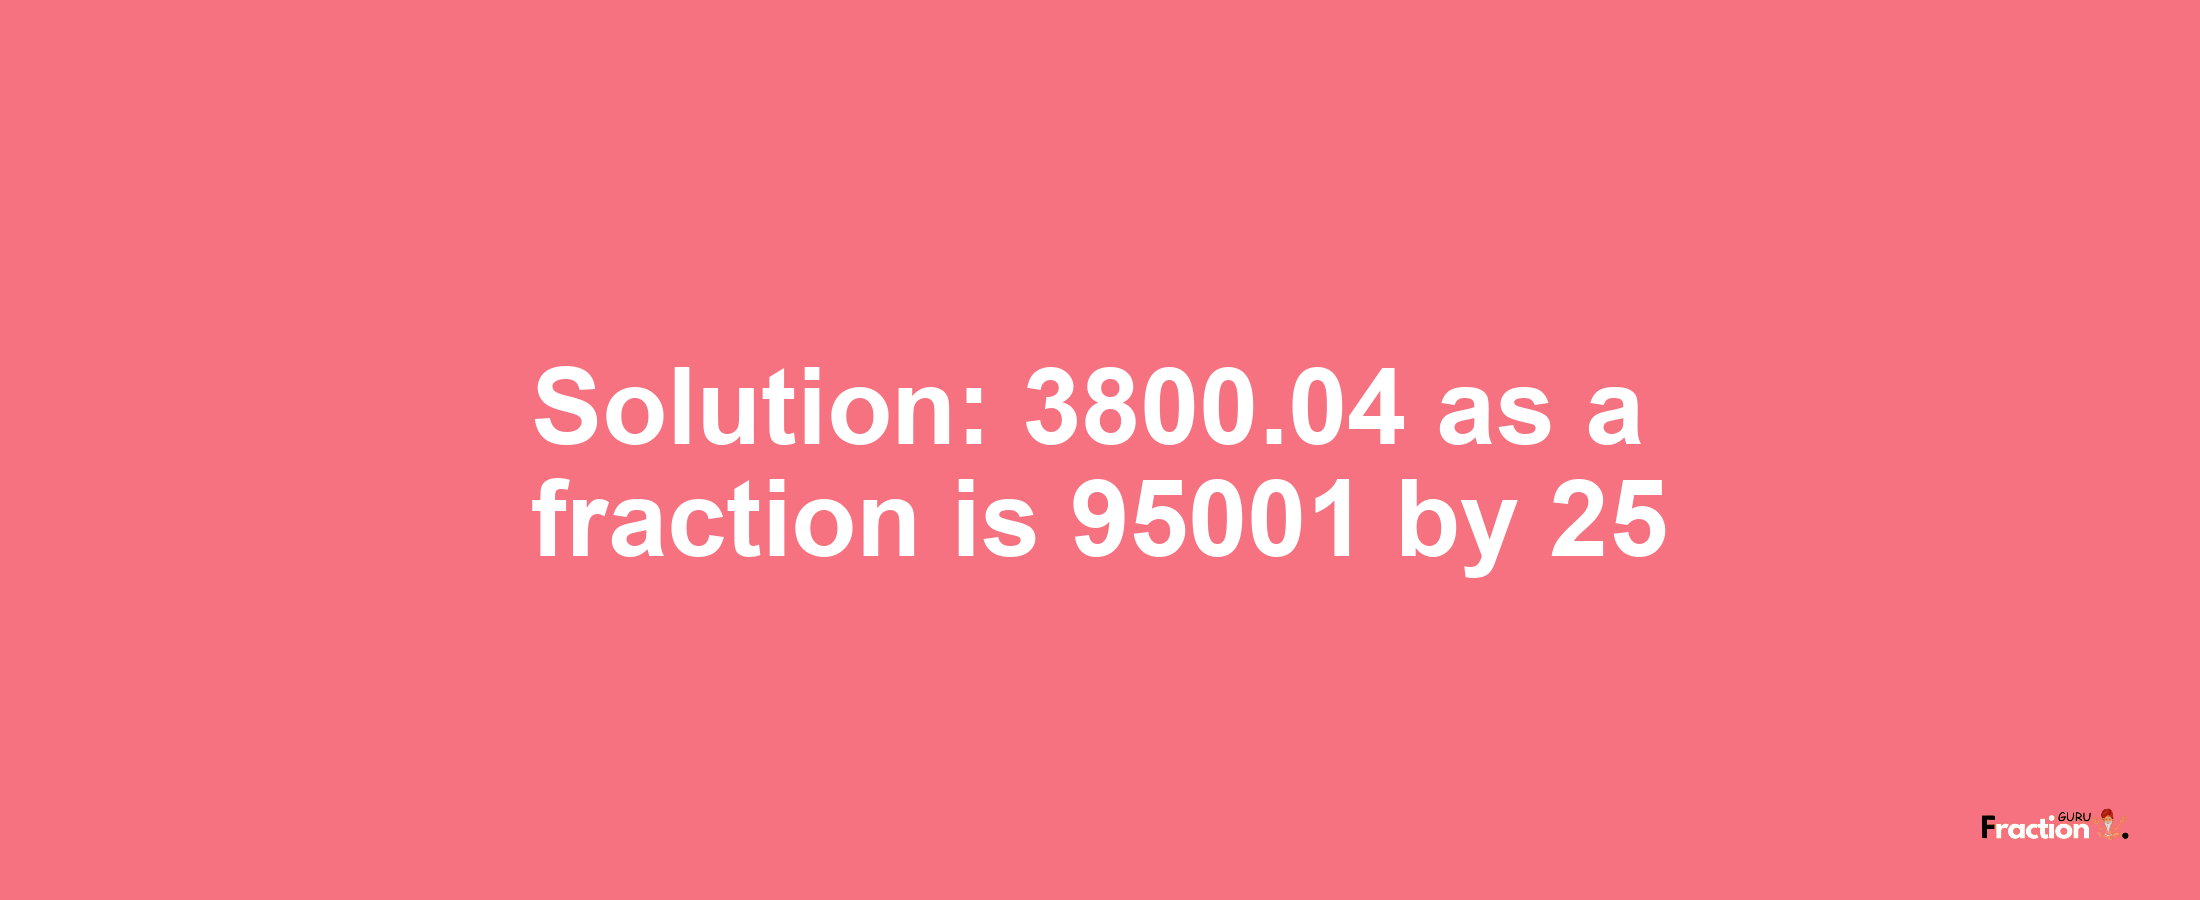 Solution:3800.04 as a fraction is 95001/25